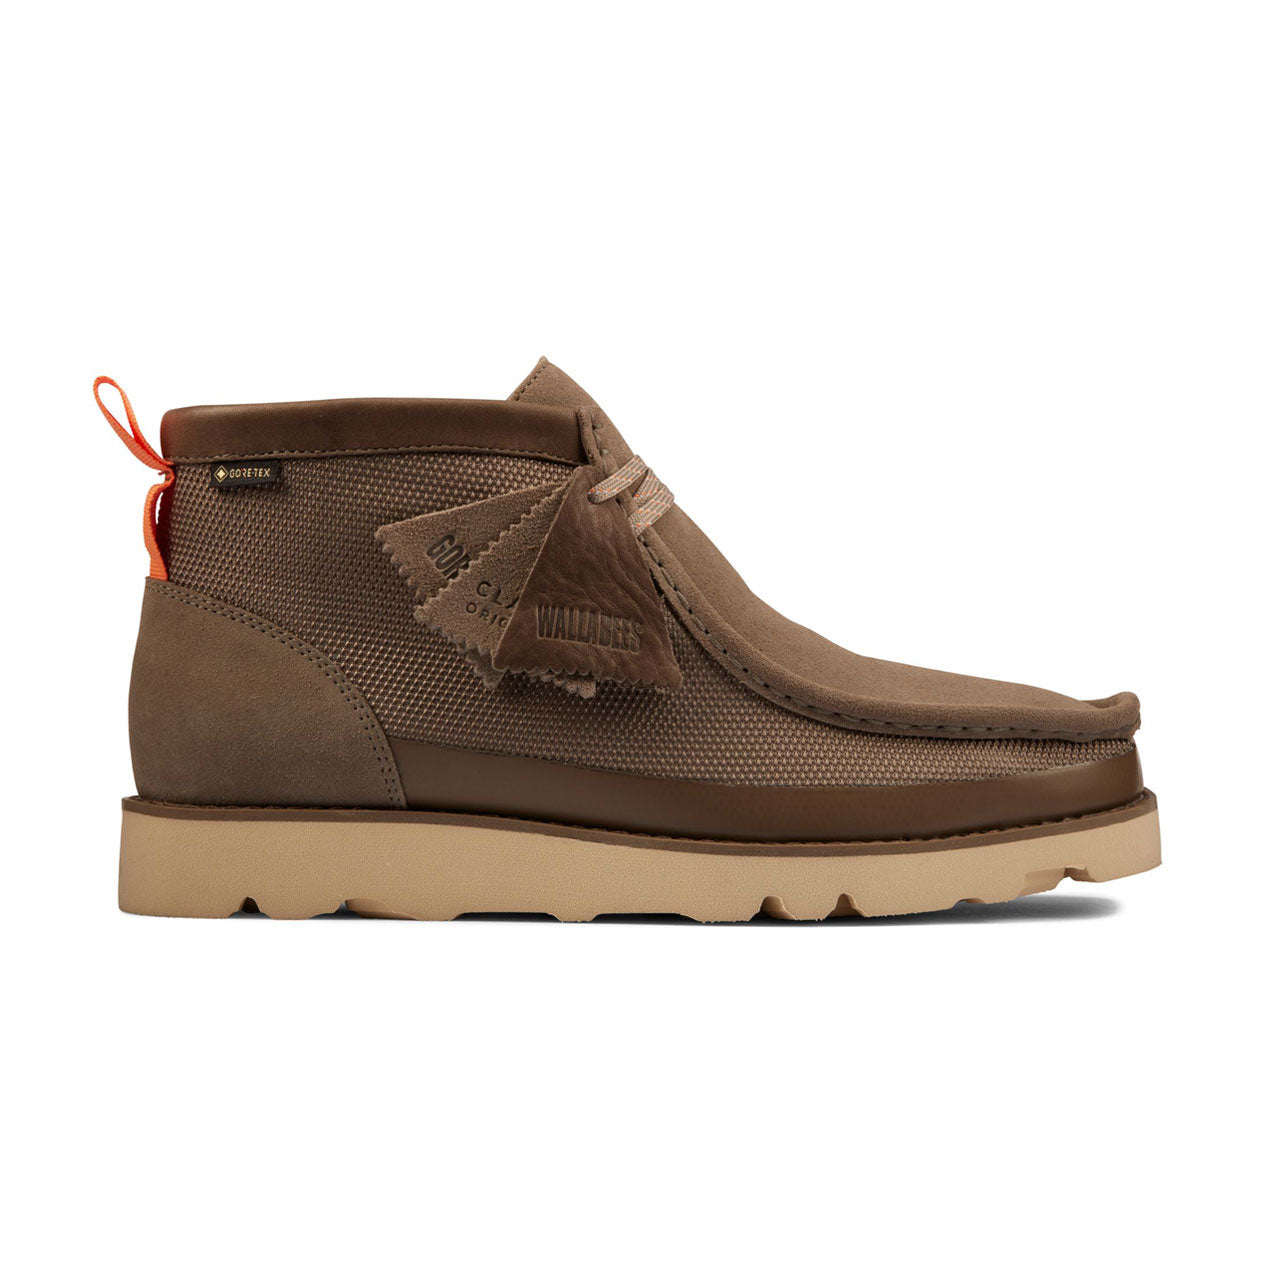 Clarks Wallabee 2.0 GTX Boots | Uncrate Supply